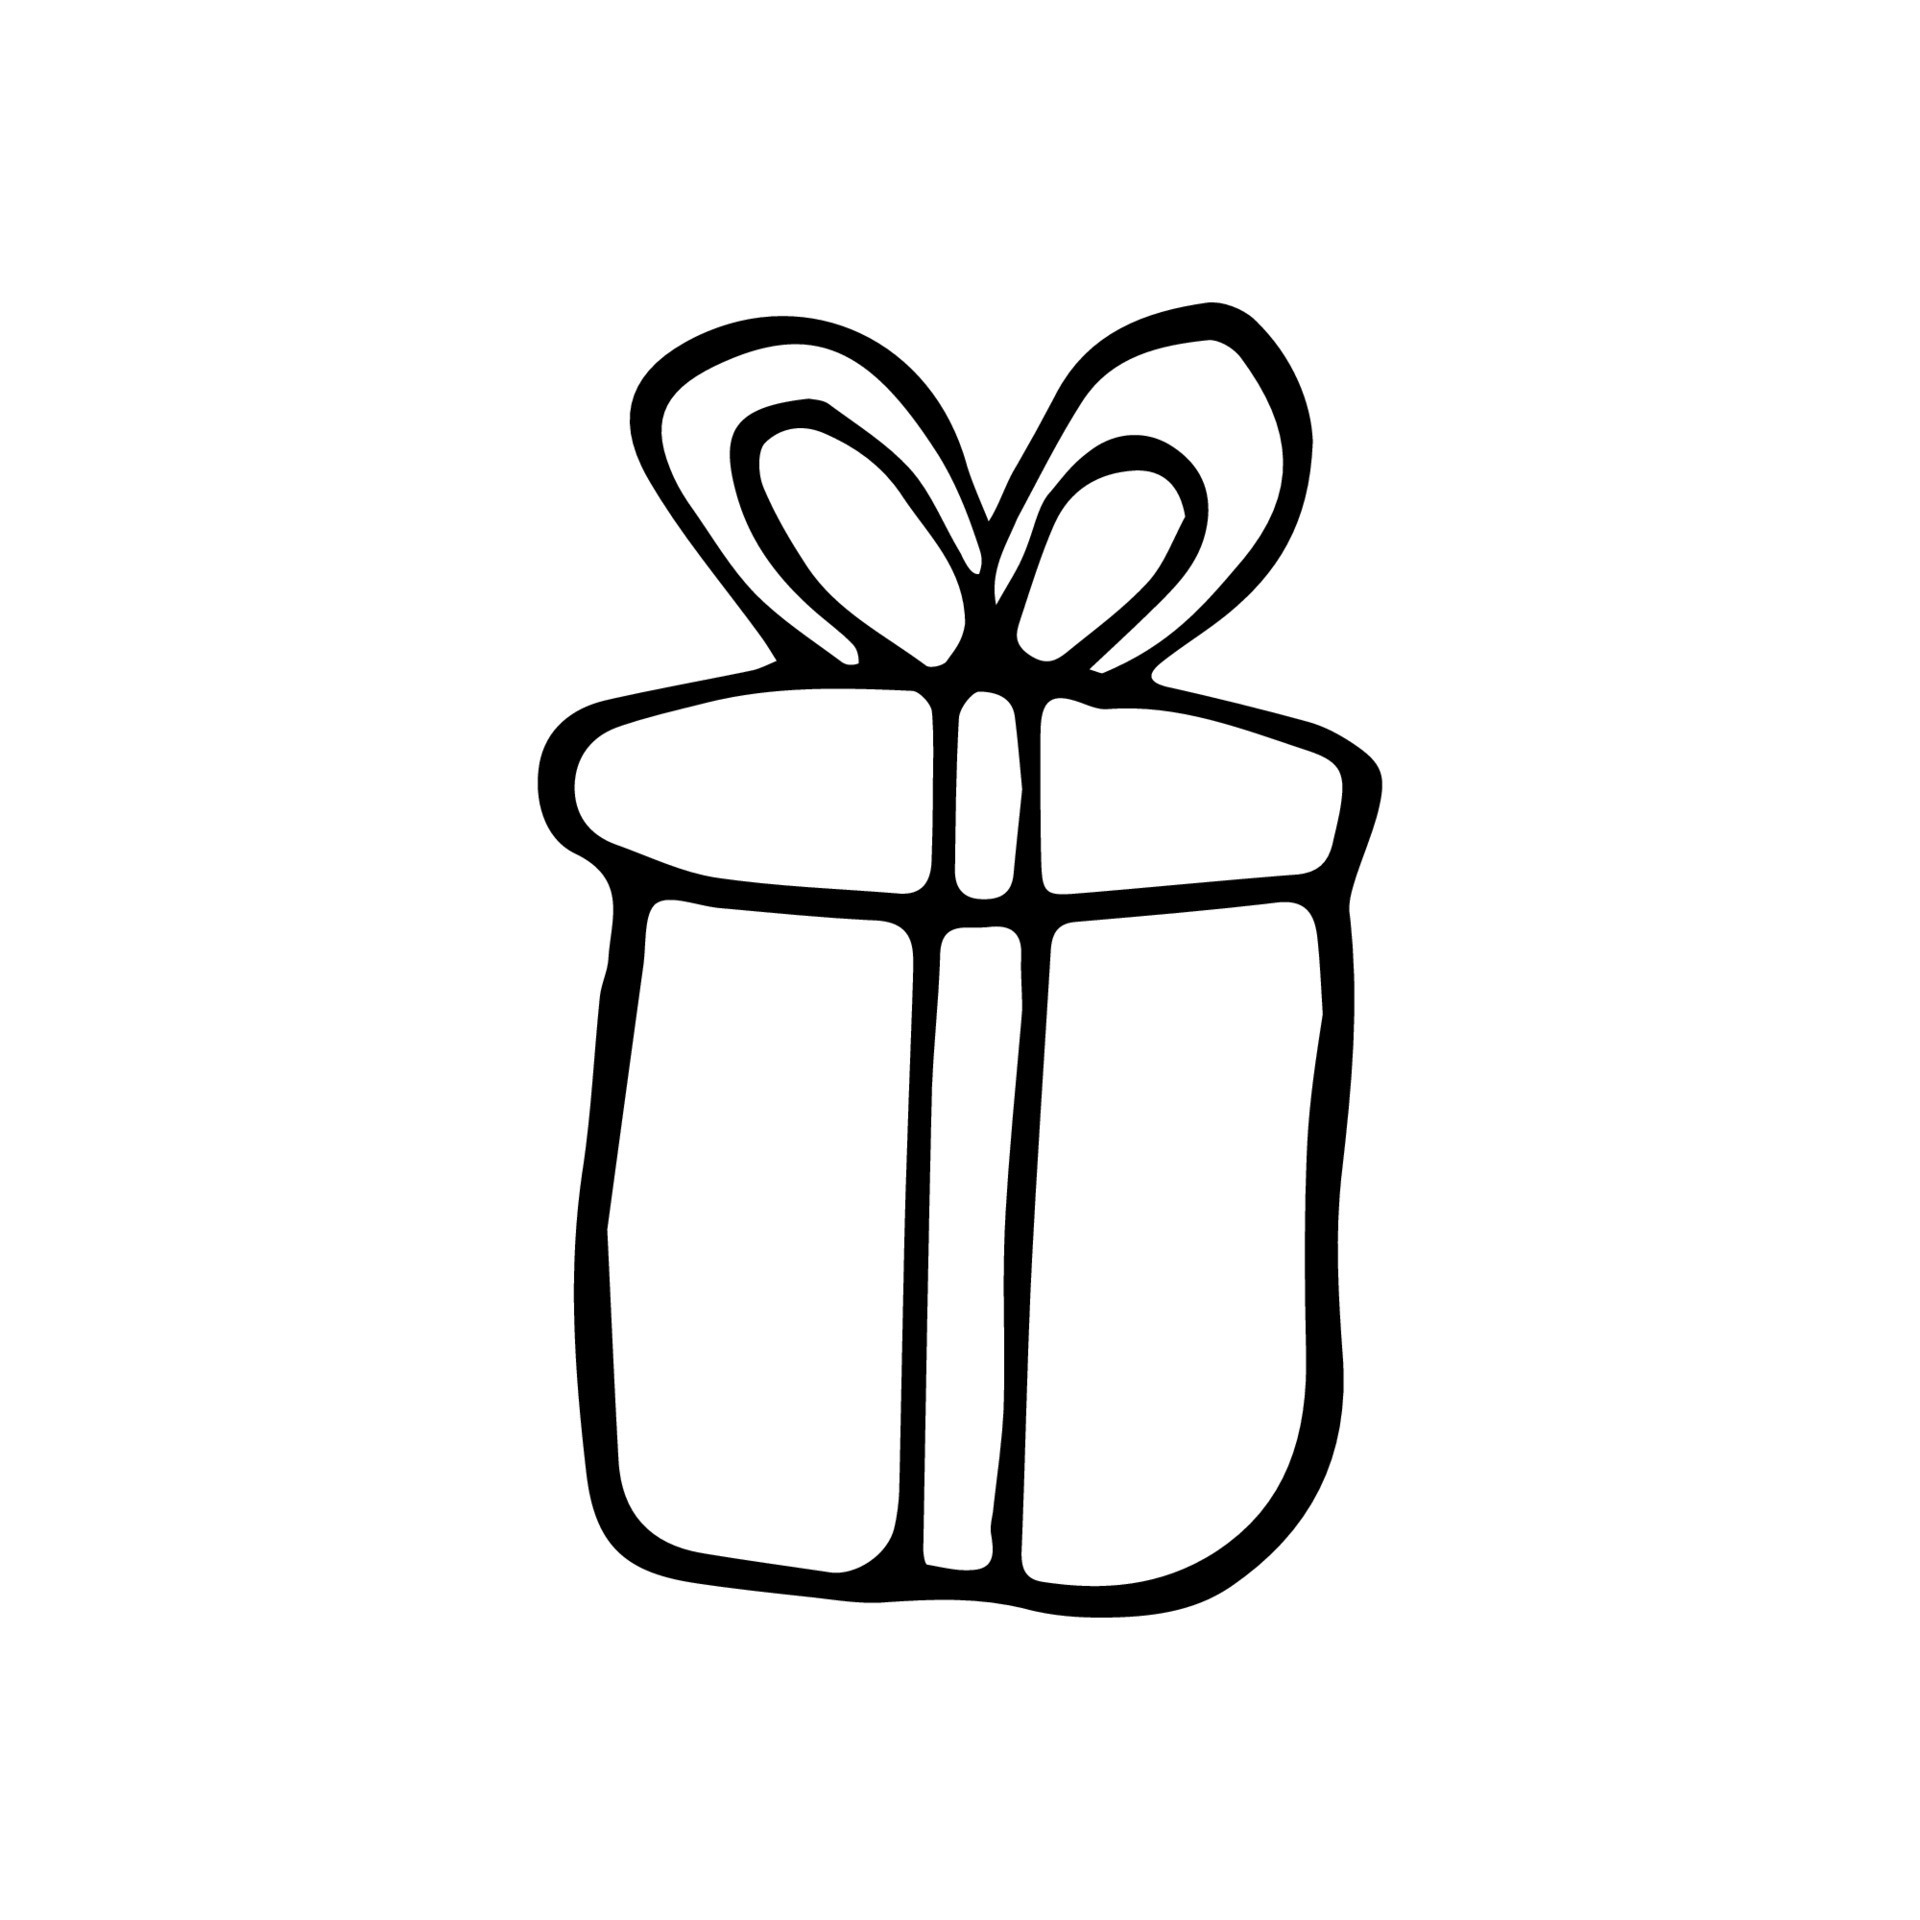 Christmas Gift Box Hand Draw Graphic by anchun.butterfly